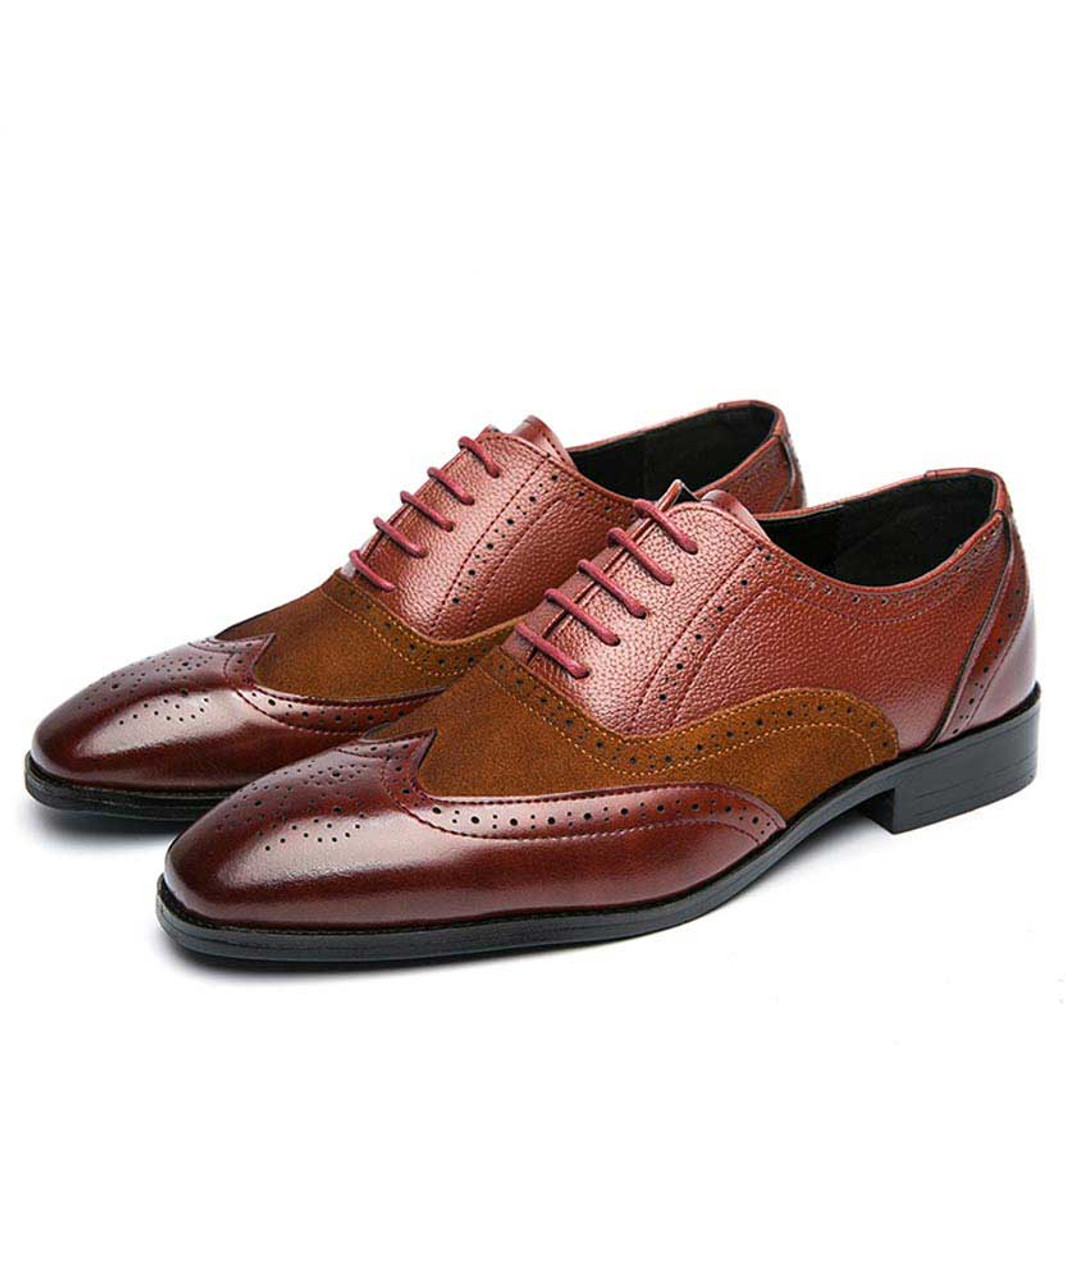 Brown brogue leather oxford dress shoe | Mens dress shoes online 2068MS